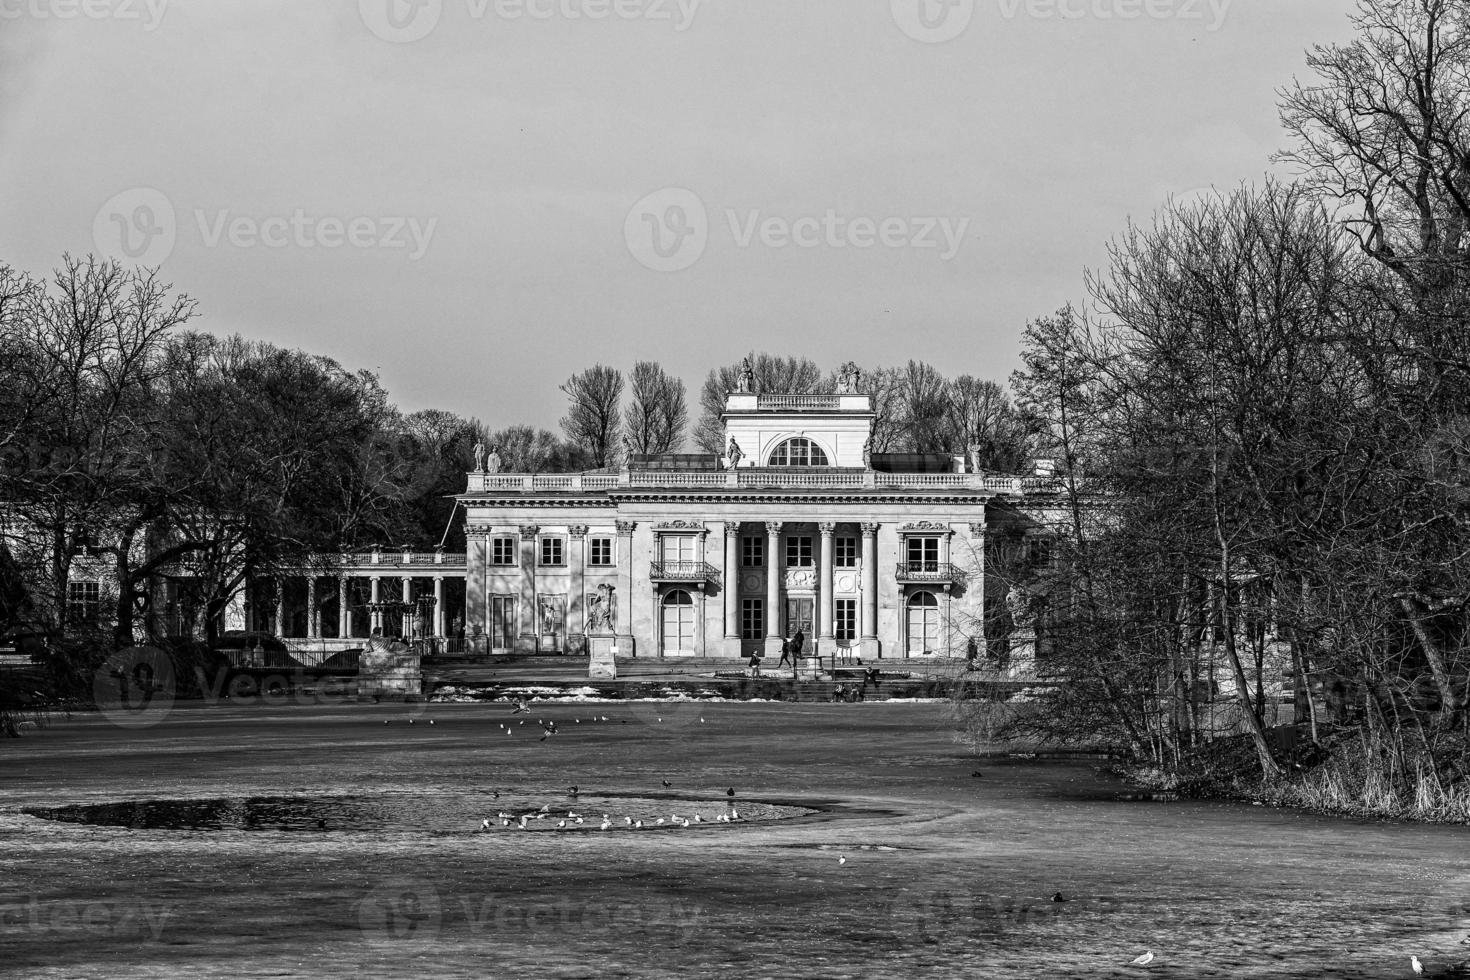 landscape with a palace on the water in Warsaw, Poland early spring on a sunny day with melting snow photo